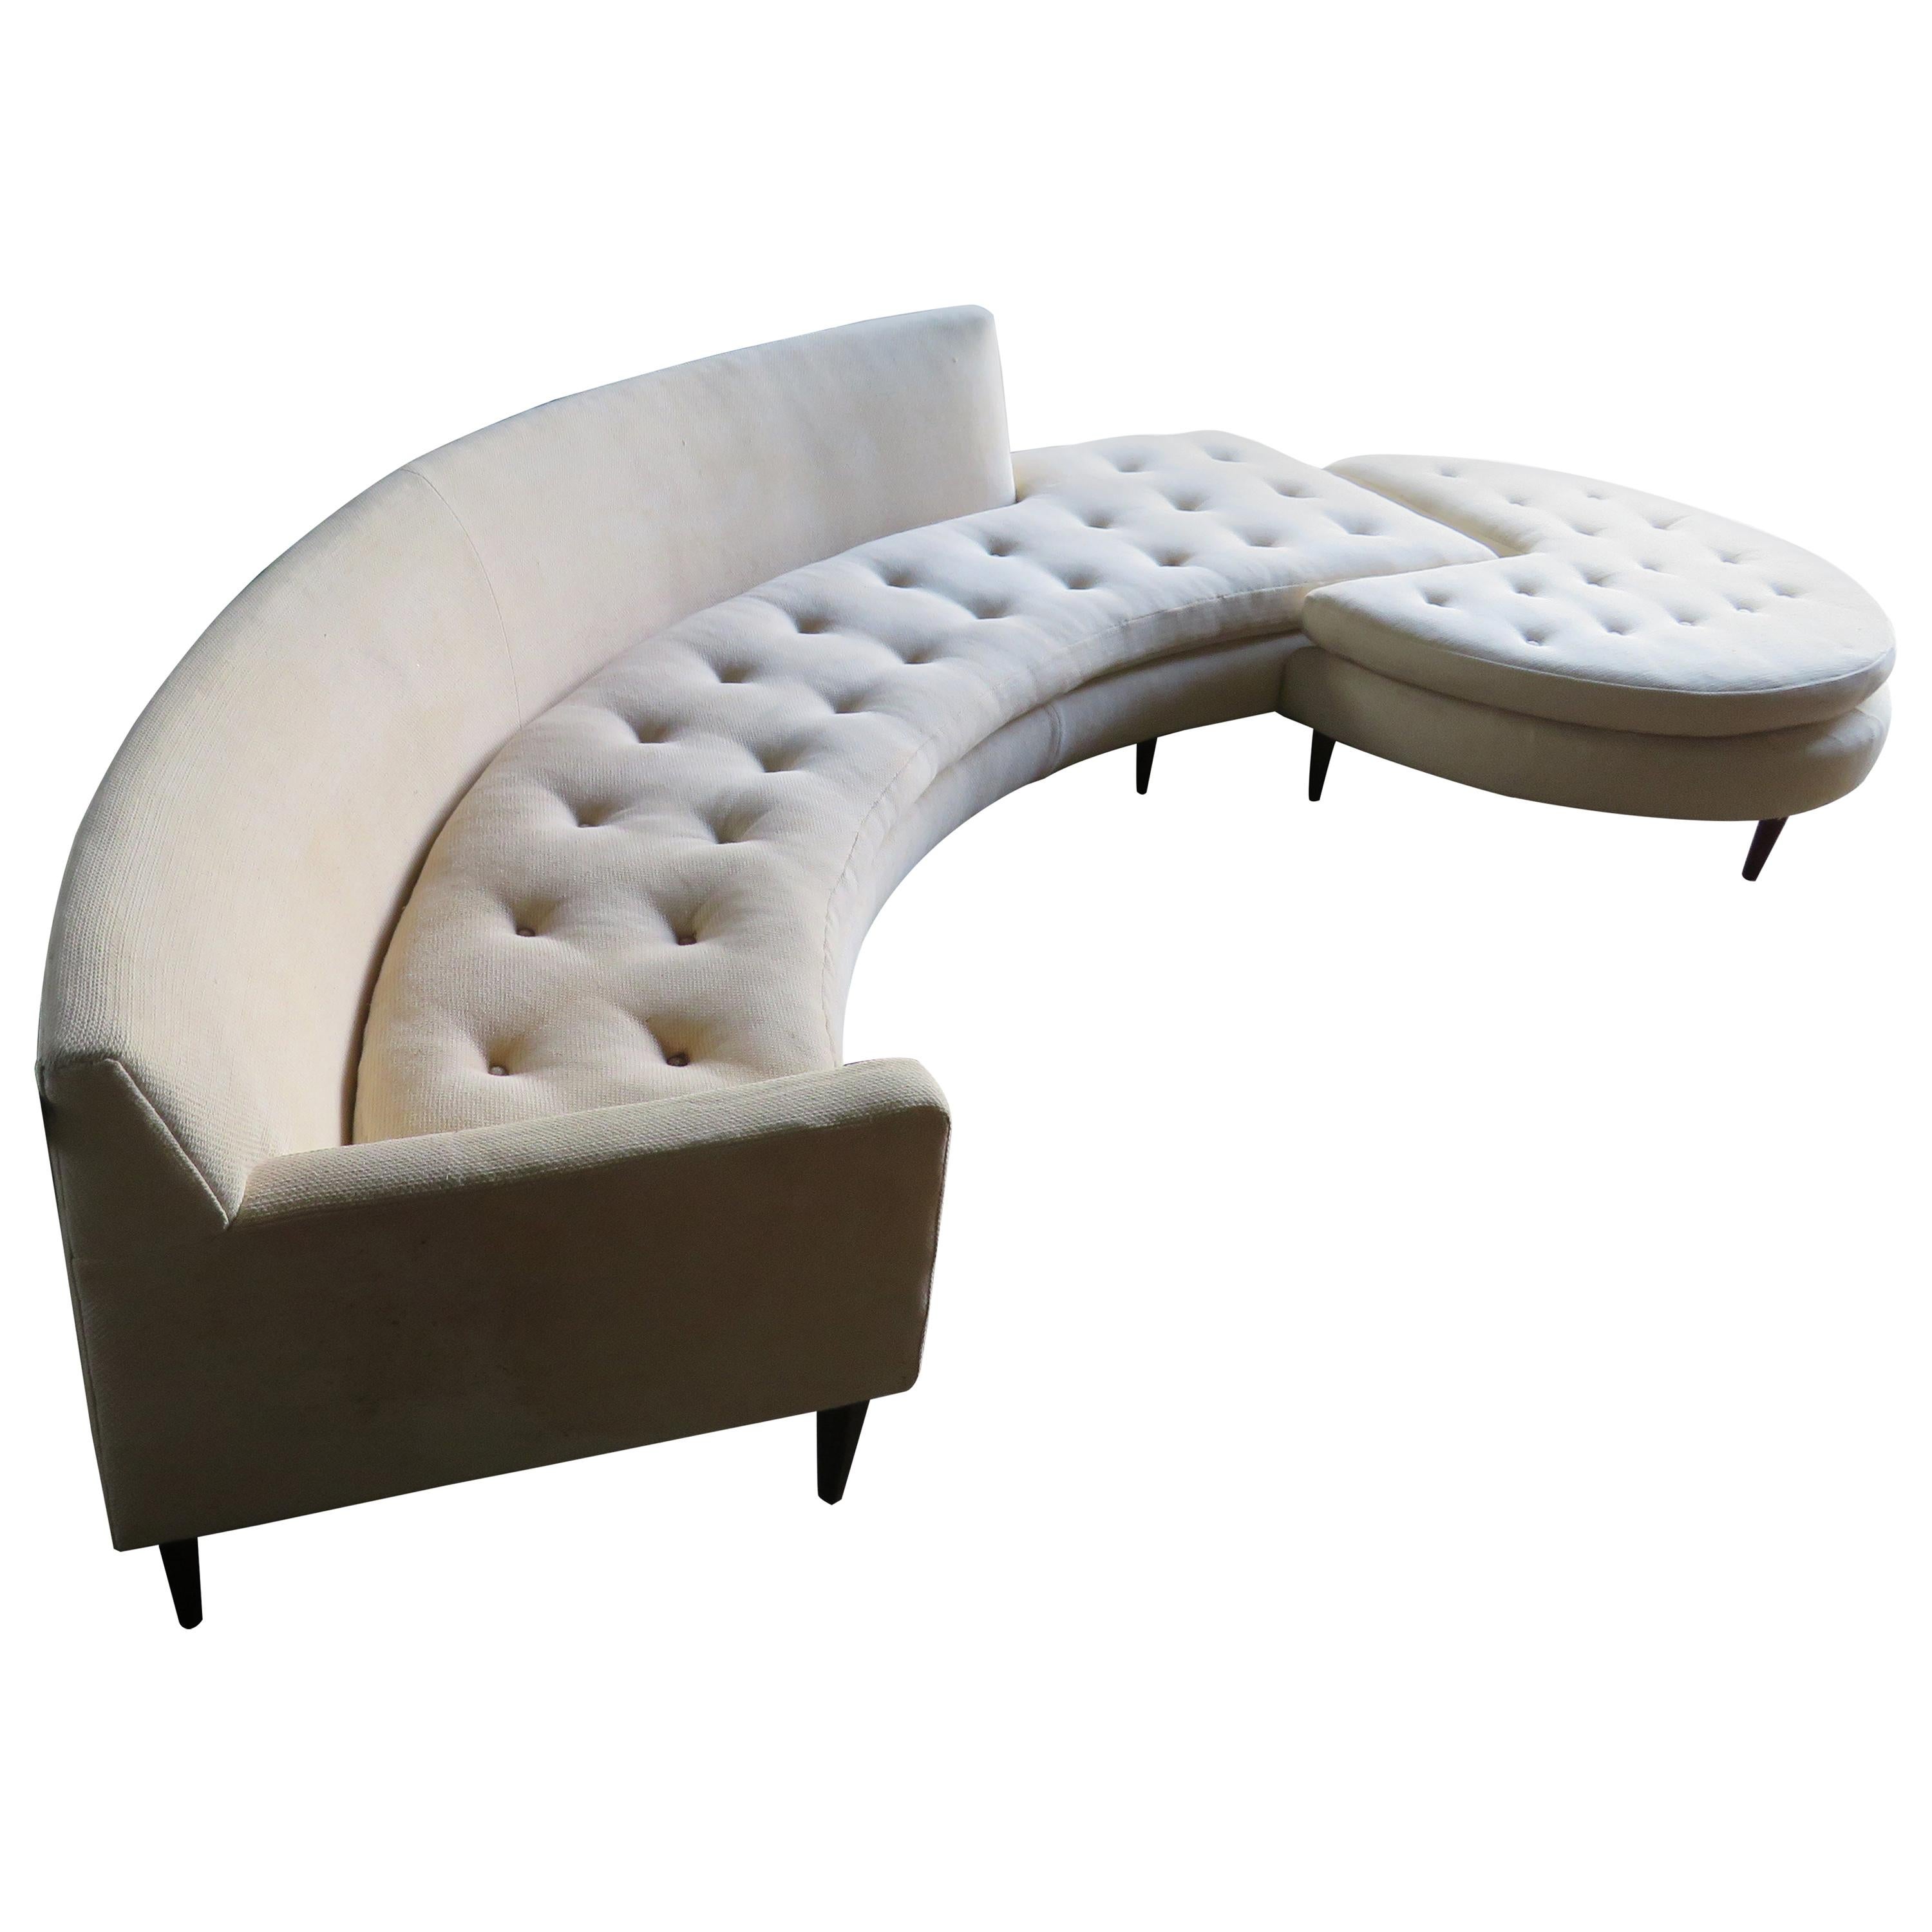 Magnificent Harvey Probber Nuclear Sert curved sofa with matching circular ottoman and triangular table. This sofa set is to die for fabulous-just check out how cool the large curved sofa piece looks with the pacman style round ottoman. There is